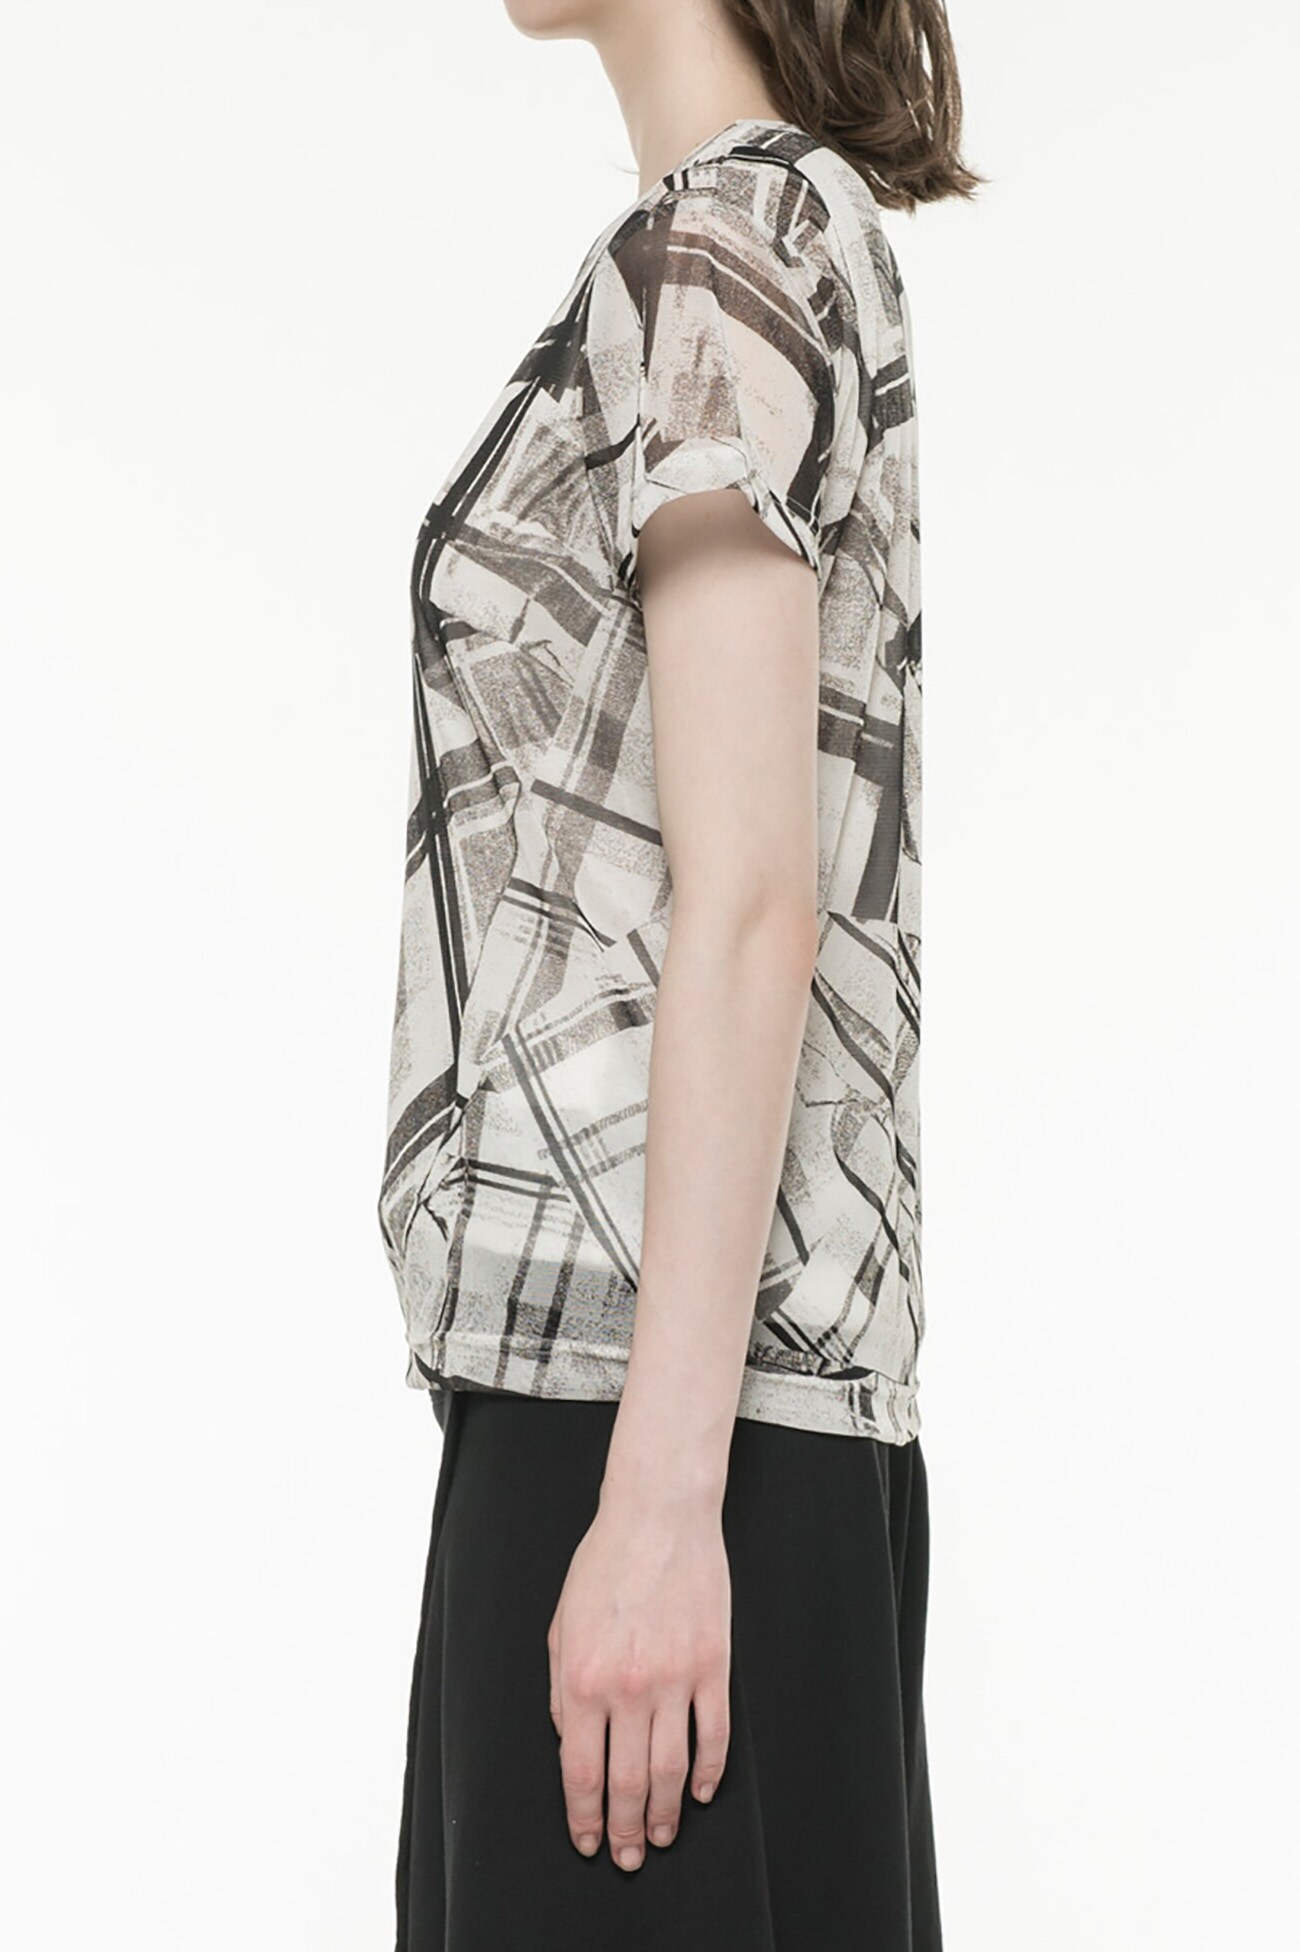 PeTULLE COLLAGE CHECK PRINT SHORT SLEEVE